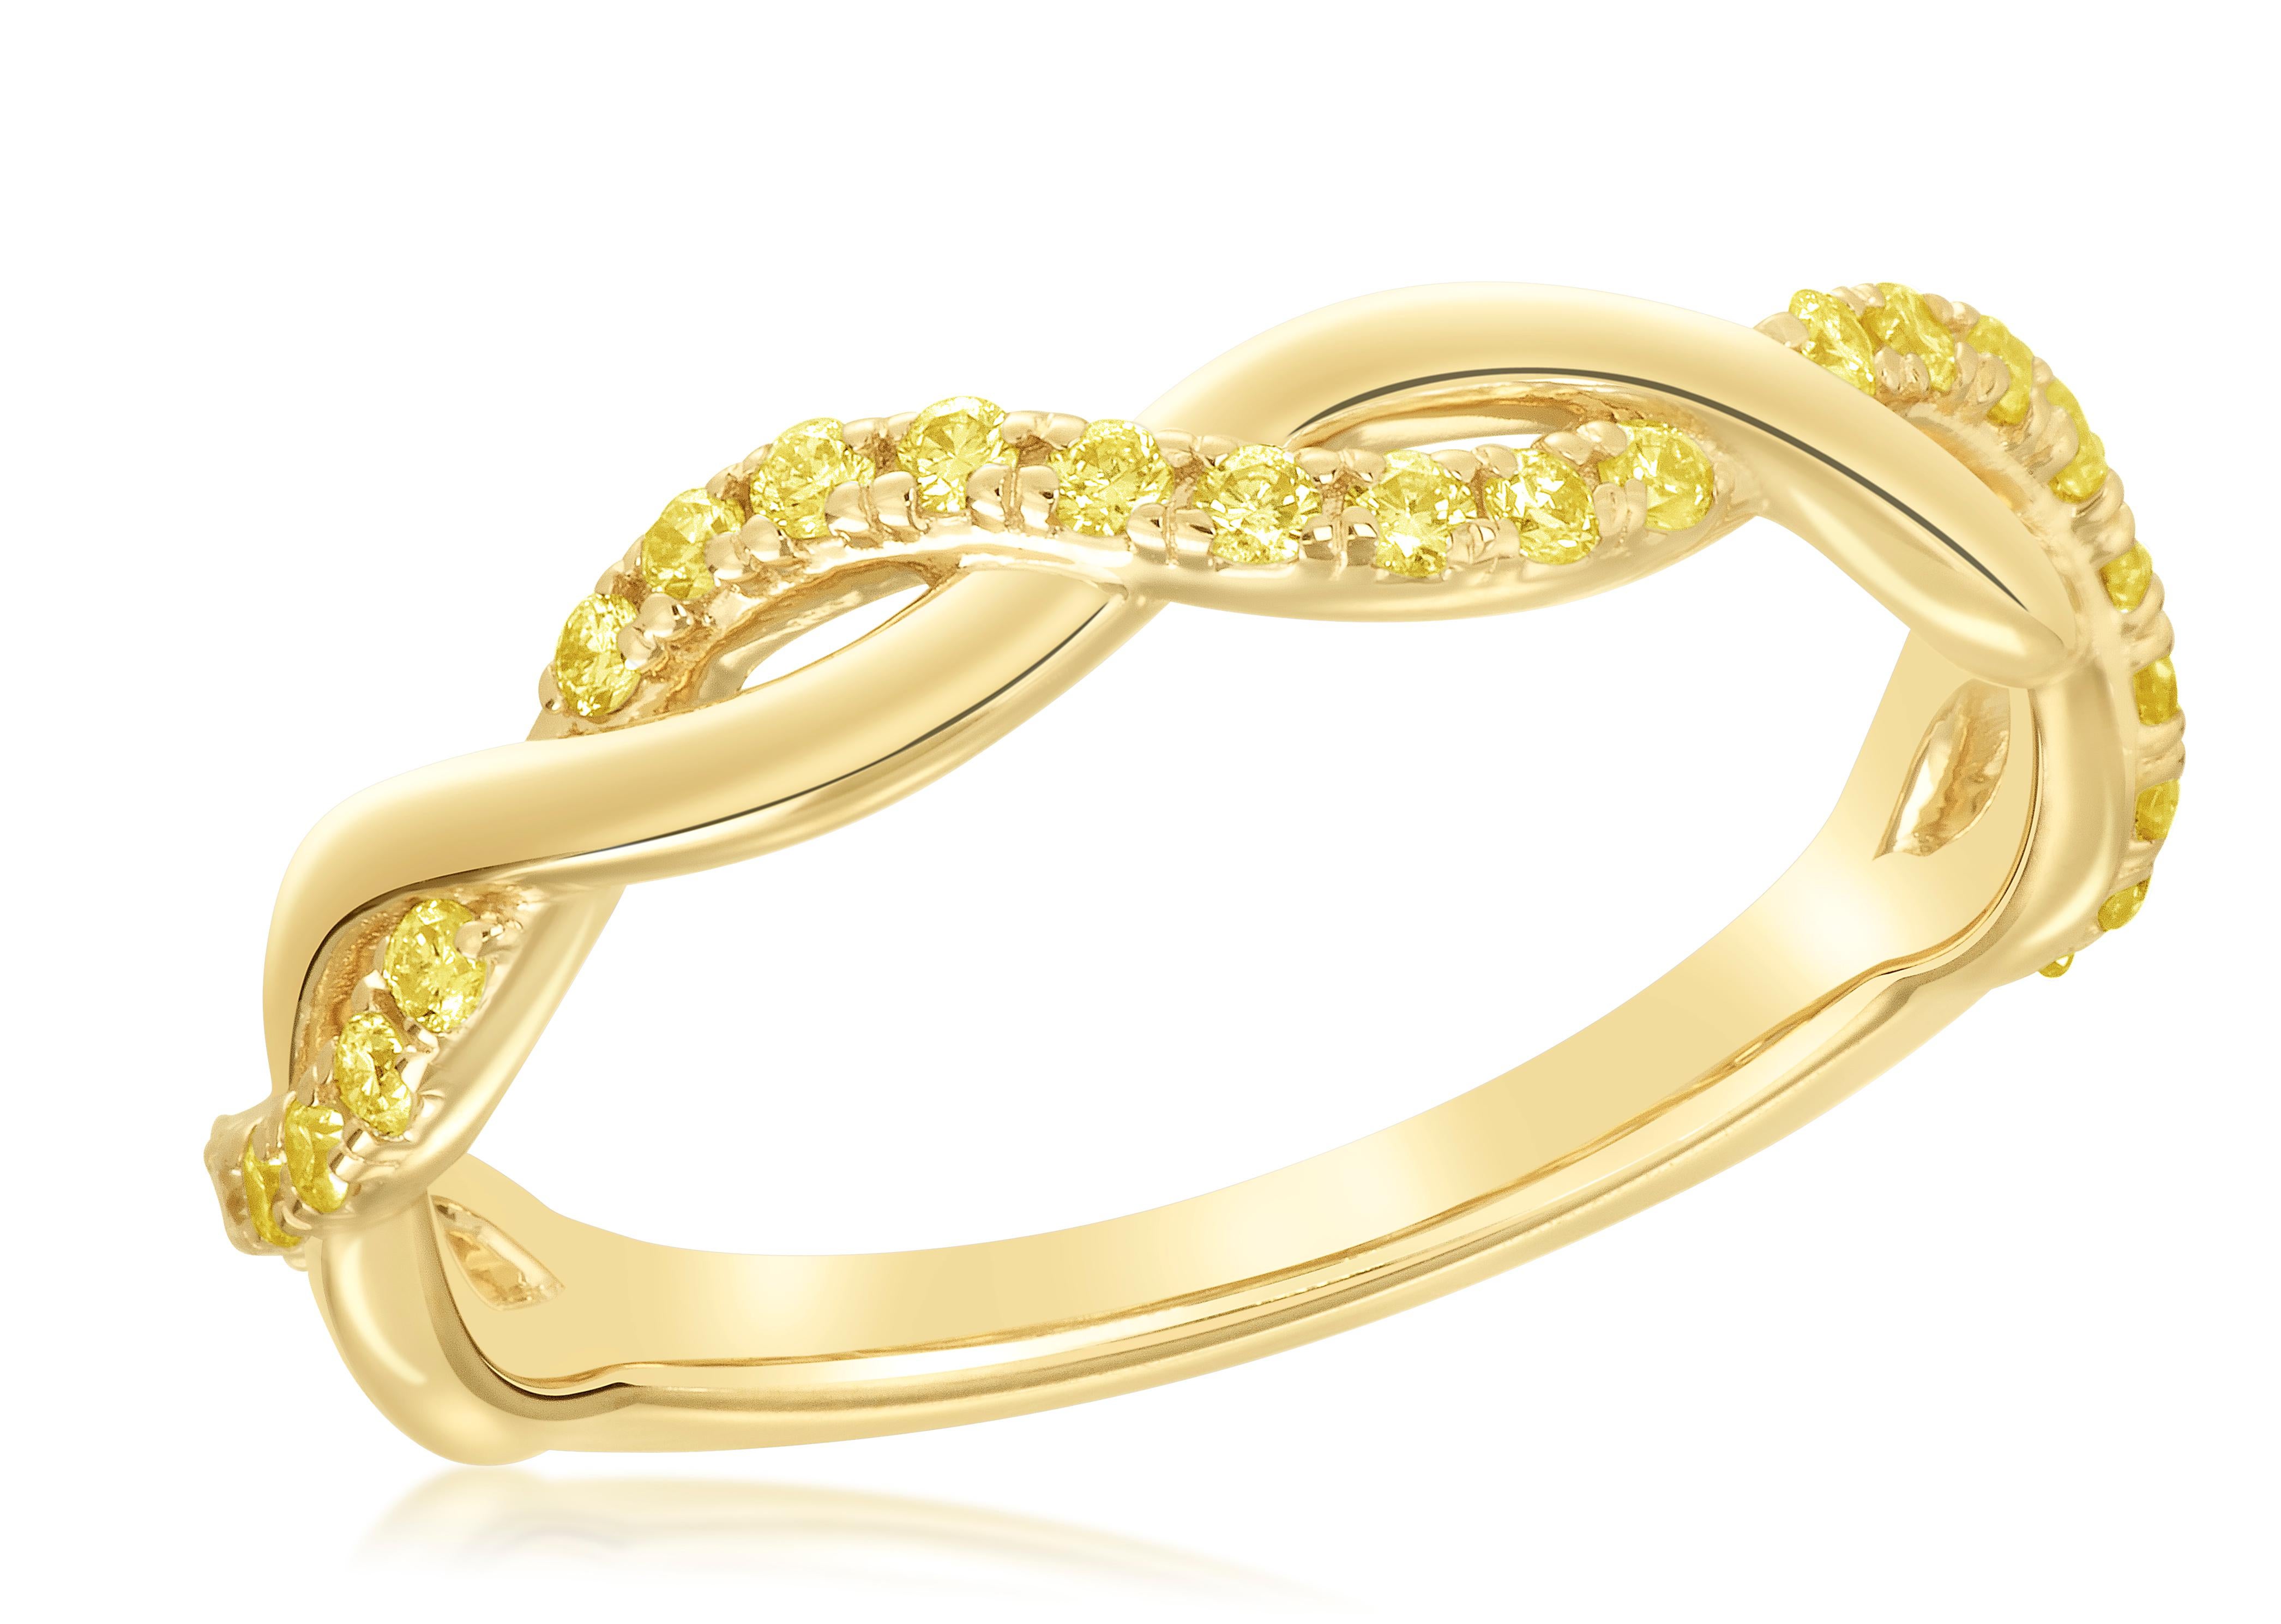 Enhance your finger with the radiant beauty of this stackable twist band featuring 27 natural yellow diamonds weighing a total of 0.27 carats. The vibrant yellow diamonds are carefully set in a captivating twist design, creating a unique and